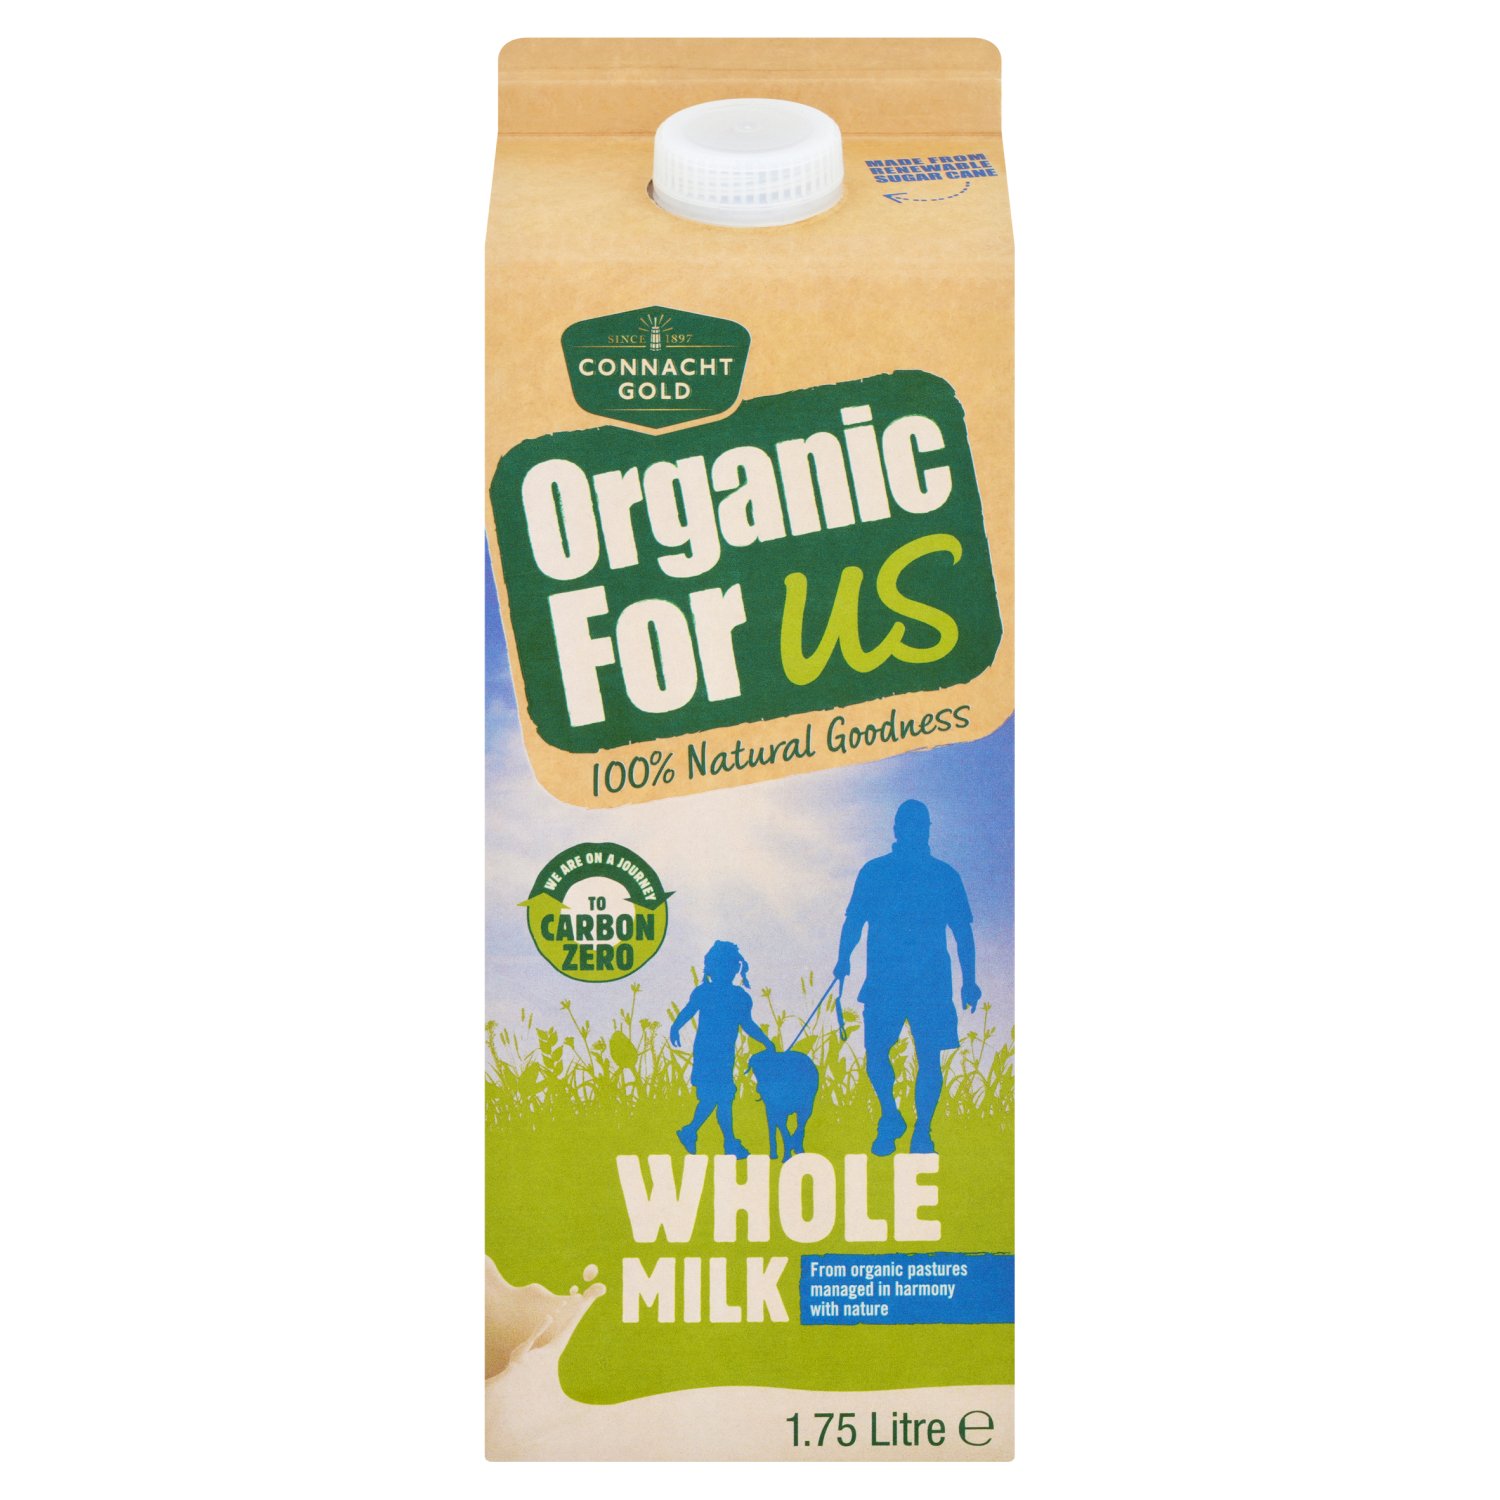 Organic is...
Full of Natural Goodness
From Organic dairy cows reared under the highest animal welfare standards
Organic Farming is kind to the environment
The easy choice for you and your family
Fed on Non GM feed
Organic pastures are rich in essential vitamins and minerals